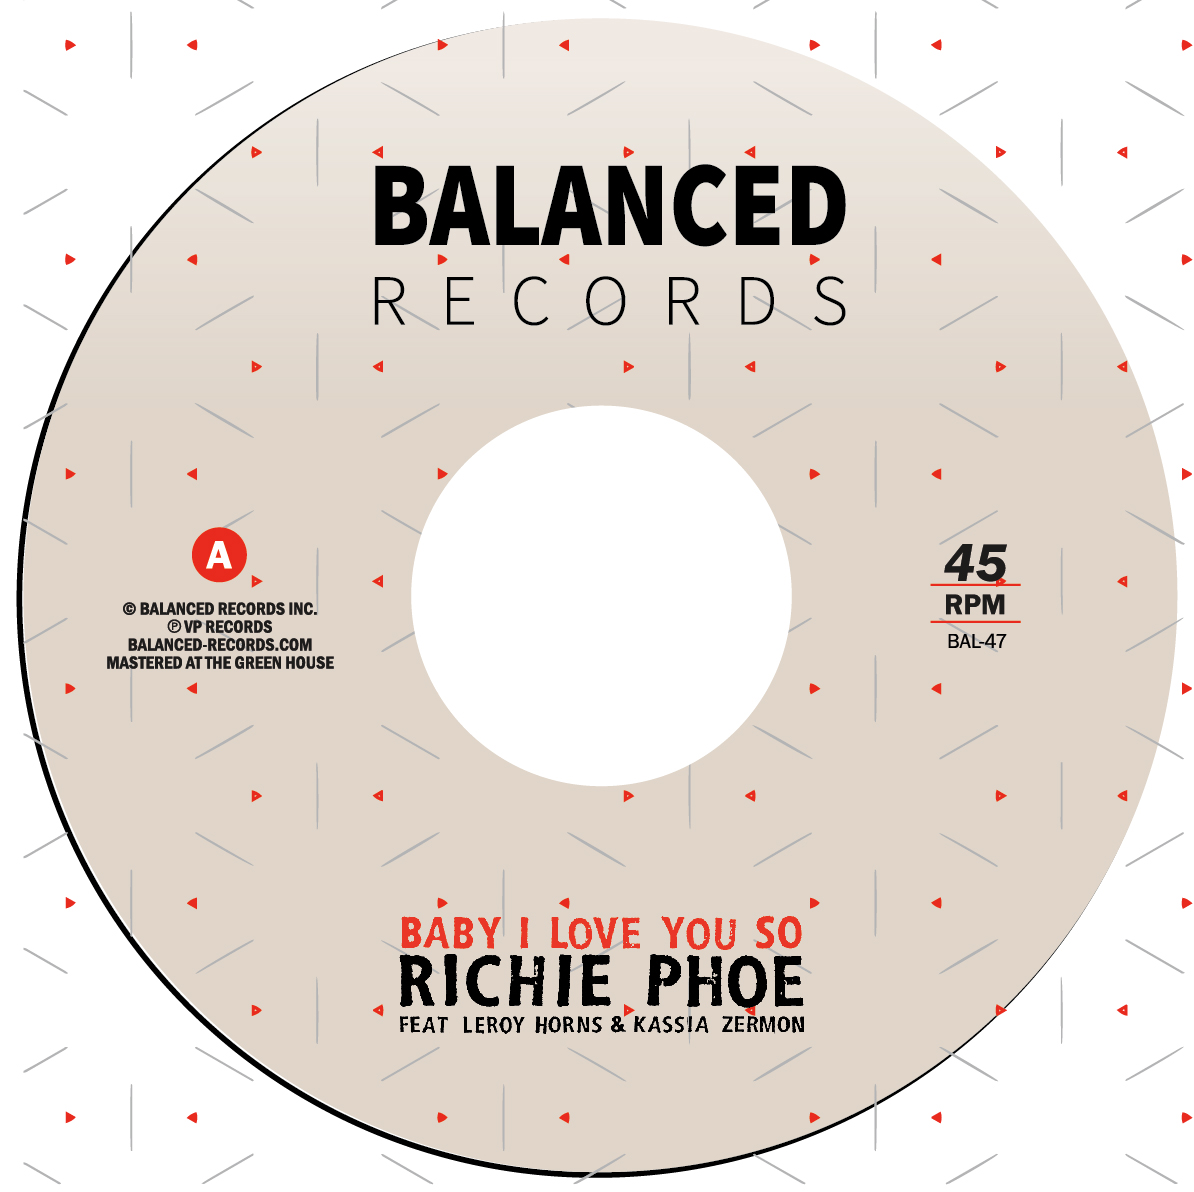 Richie Phoe/BABY I LOVE YOU SO 7"